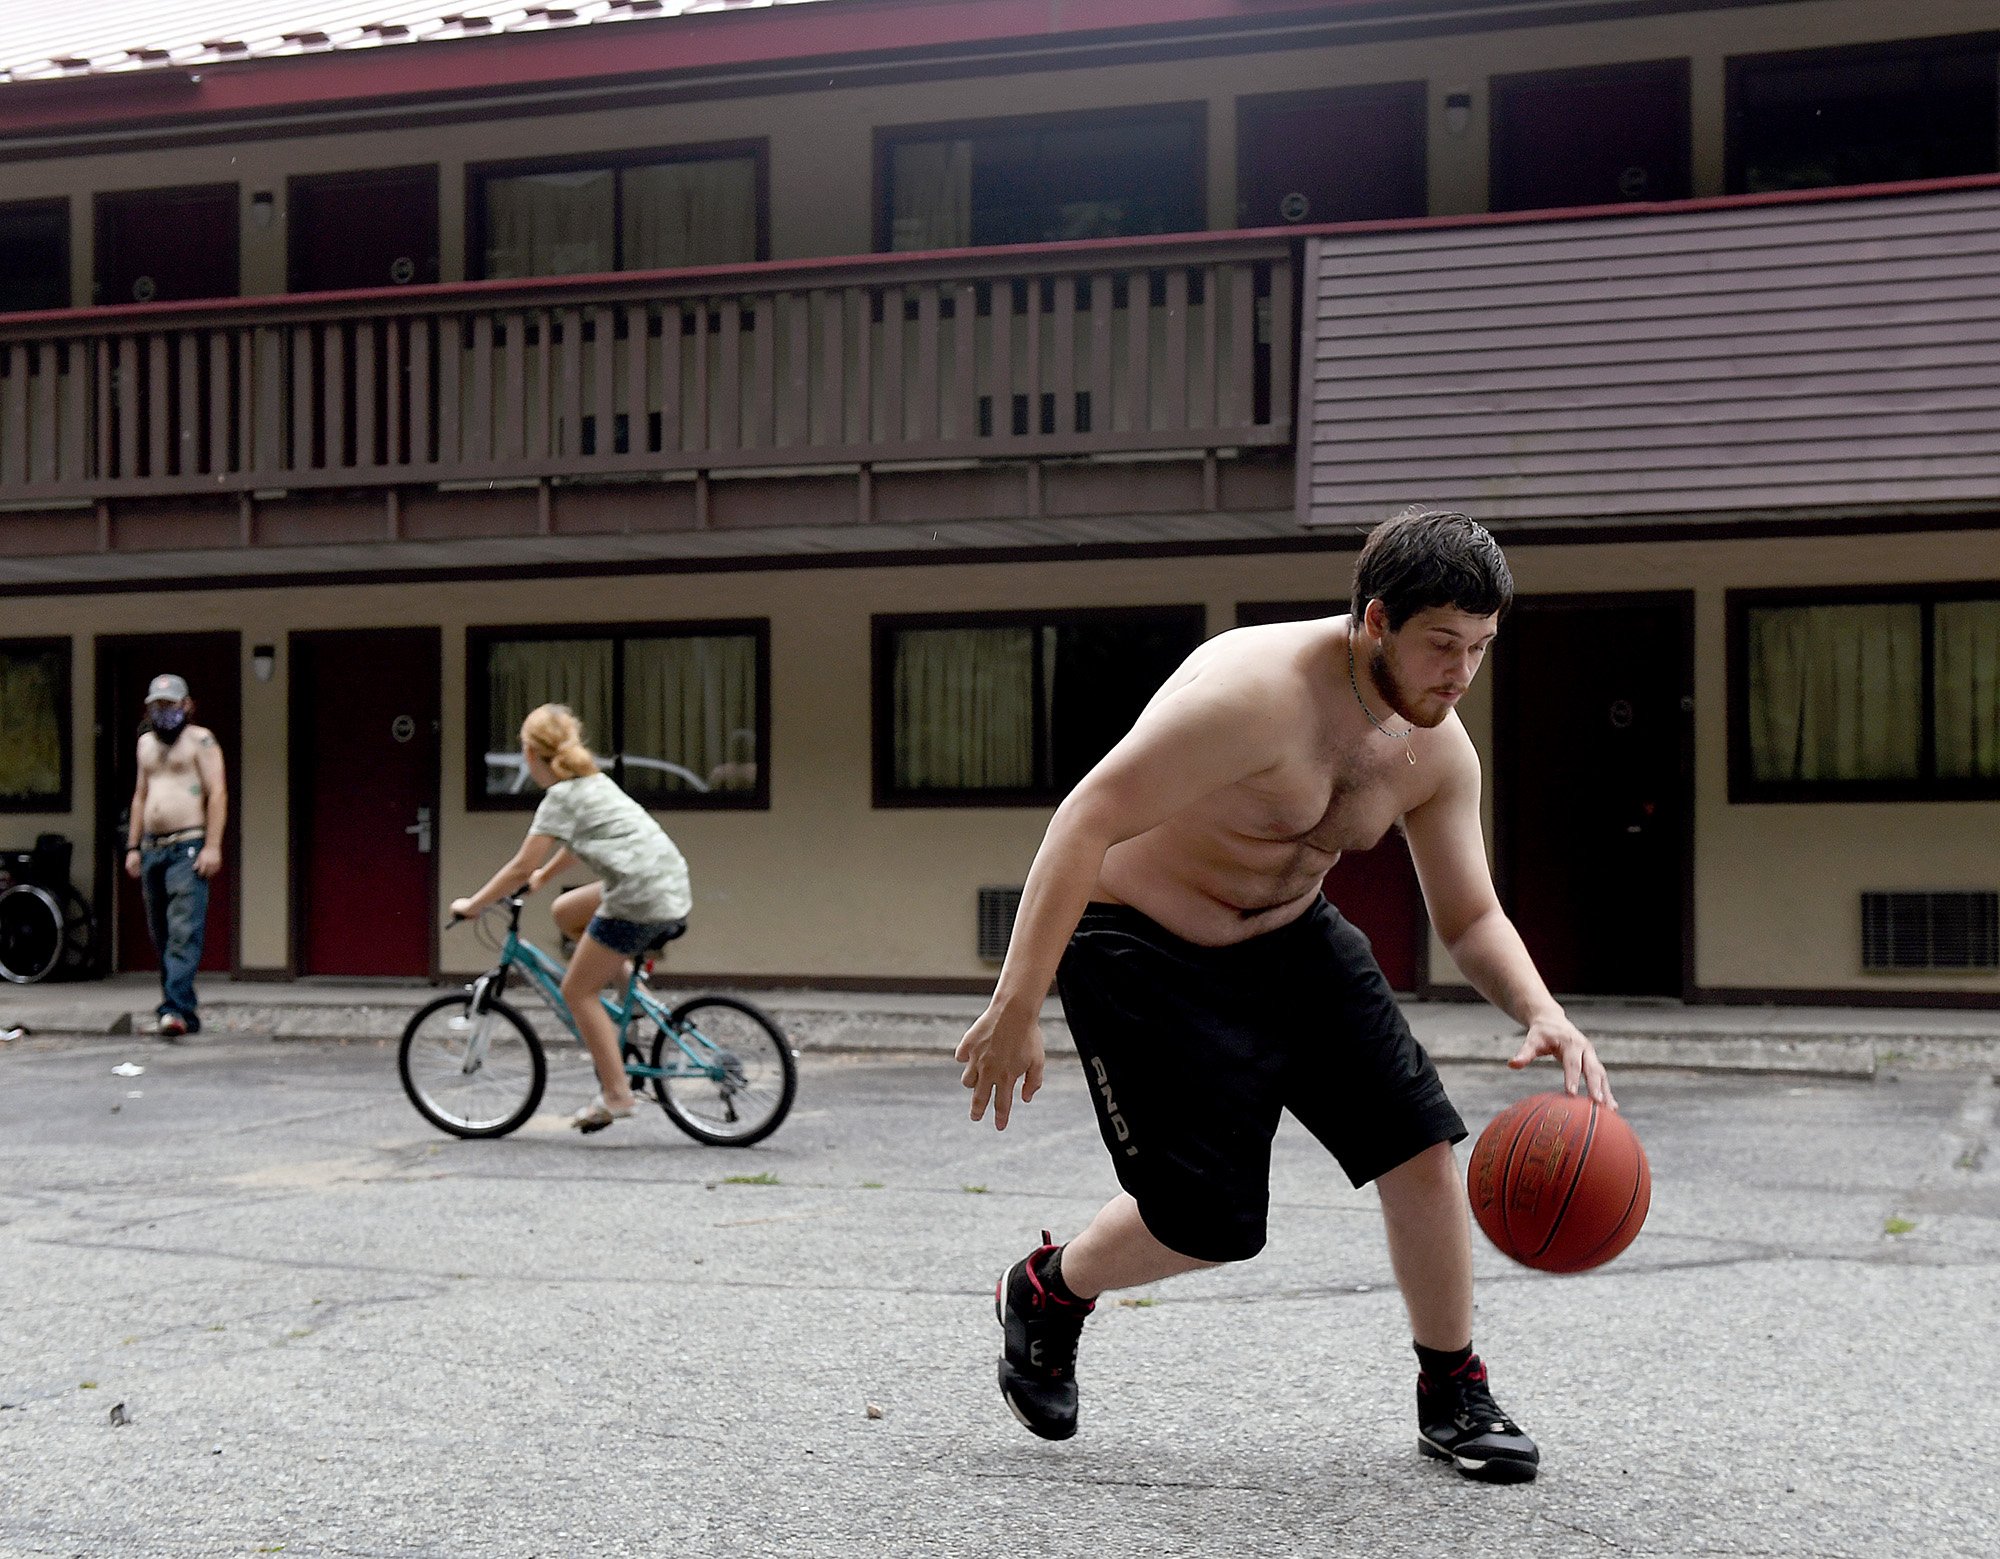  Mike Roy, 18, dribbles a basketball in the parking lot outside his family’s room at the Red Roof Inn in New London on Monday, August 8, 2022. Roy has lived at the motel with his mother Sabrina Babey and her fiancé William Waddicor two dogs and a cat